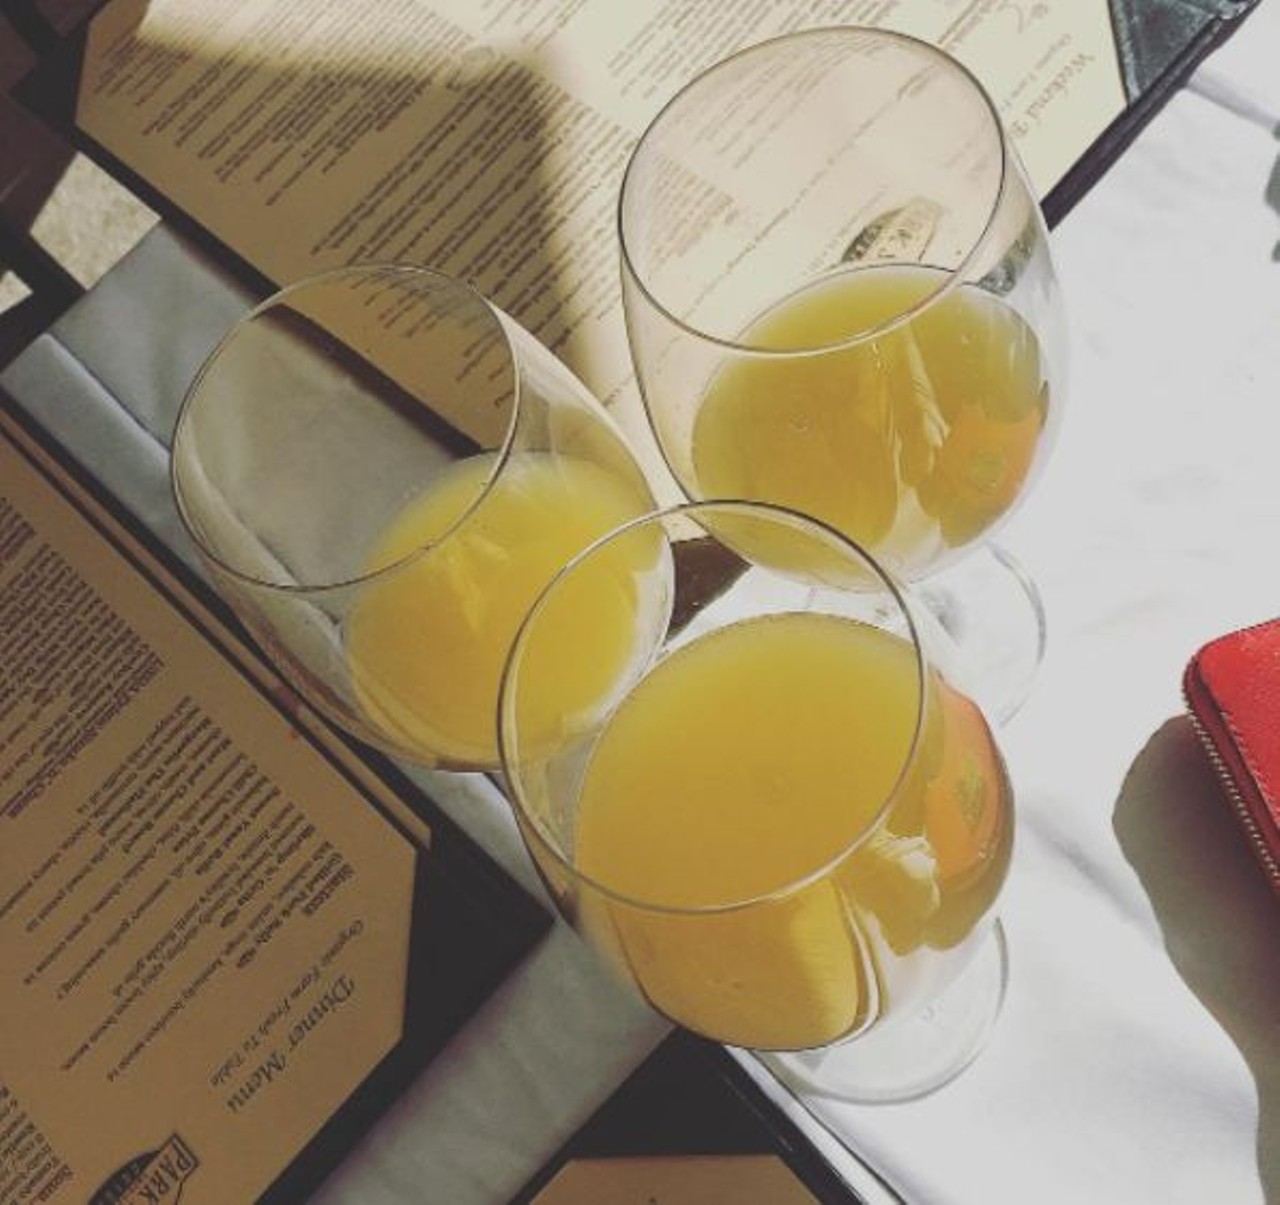 Park Station 
Saturday and Sunday brunches from 8 a.m. to 4 p.m. at this American rustic cuisine restaurant get you as many mimosas as you want for just $12.
212 N. Park Ave., Winter Park, 407-740-0212
Photo via msnisha/Instagram